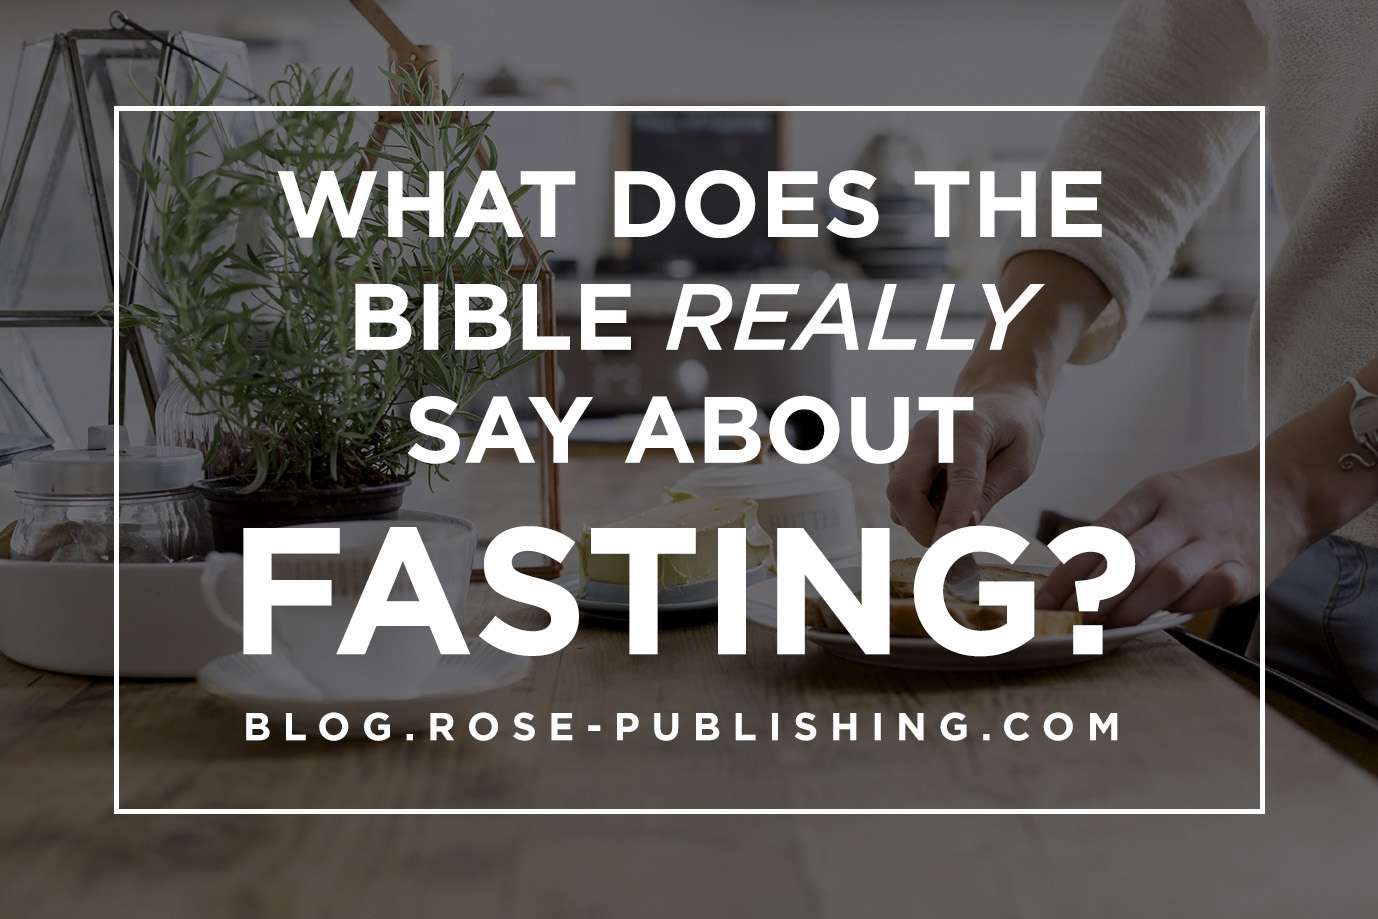 What Does the Bible REALLY Say About Fasting?